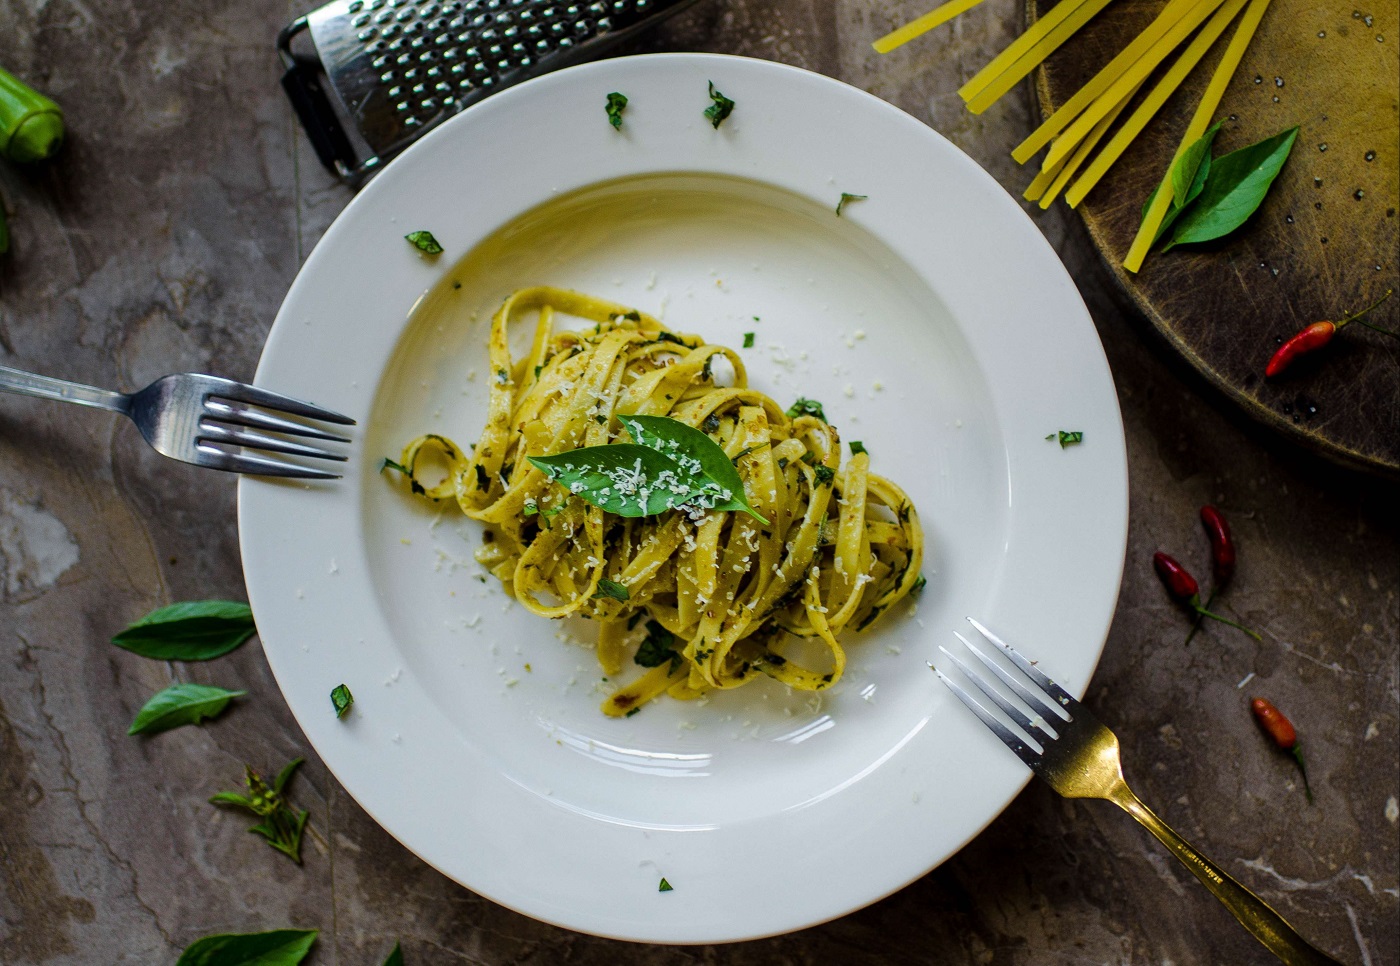 Fettuccine with strips of chicken breast and basil and honey sauce - Fettuccine with strips of chicken breast and basil and honey sauce